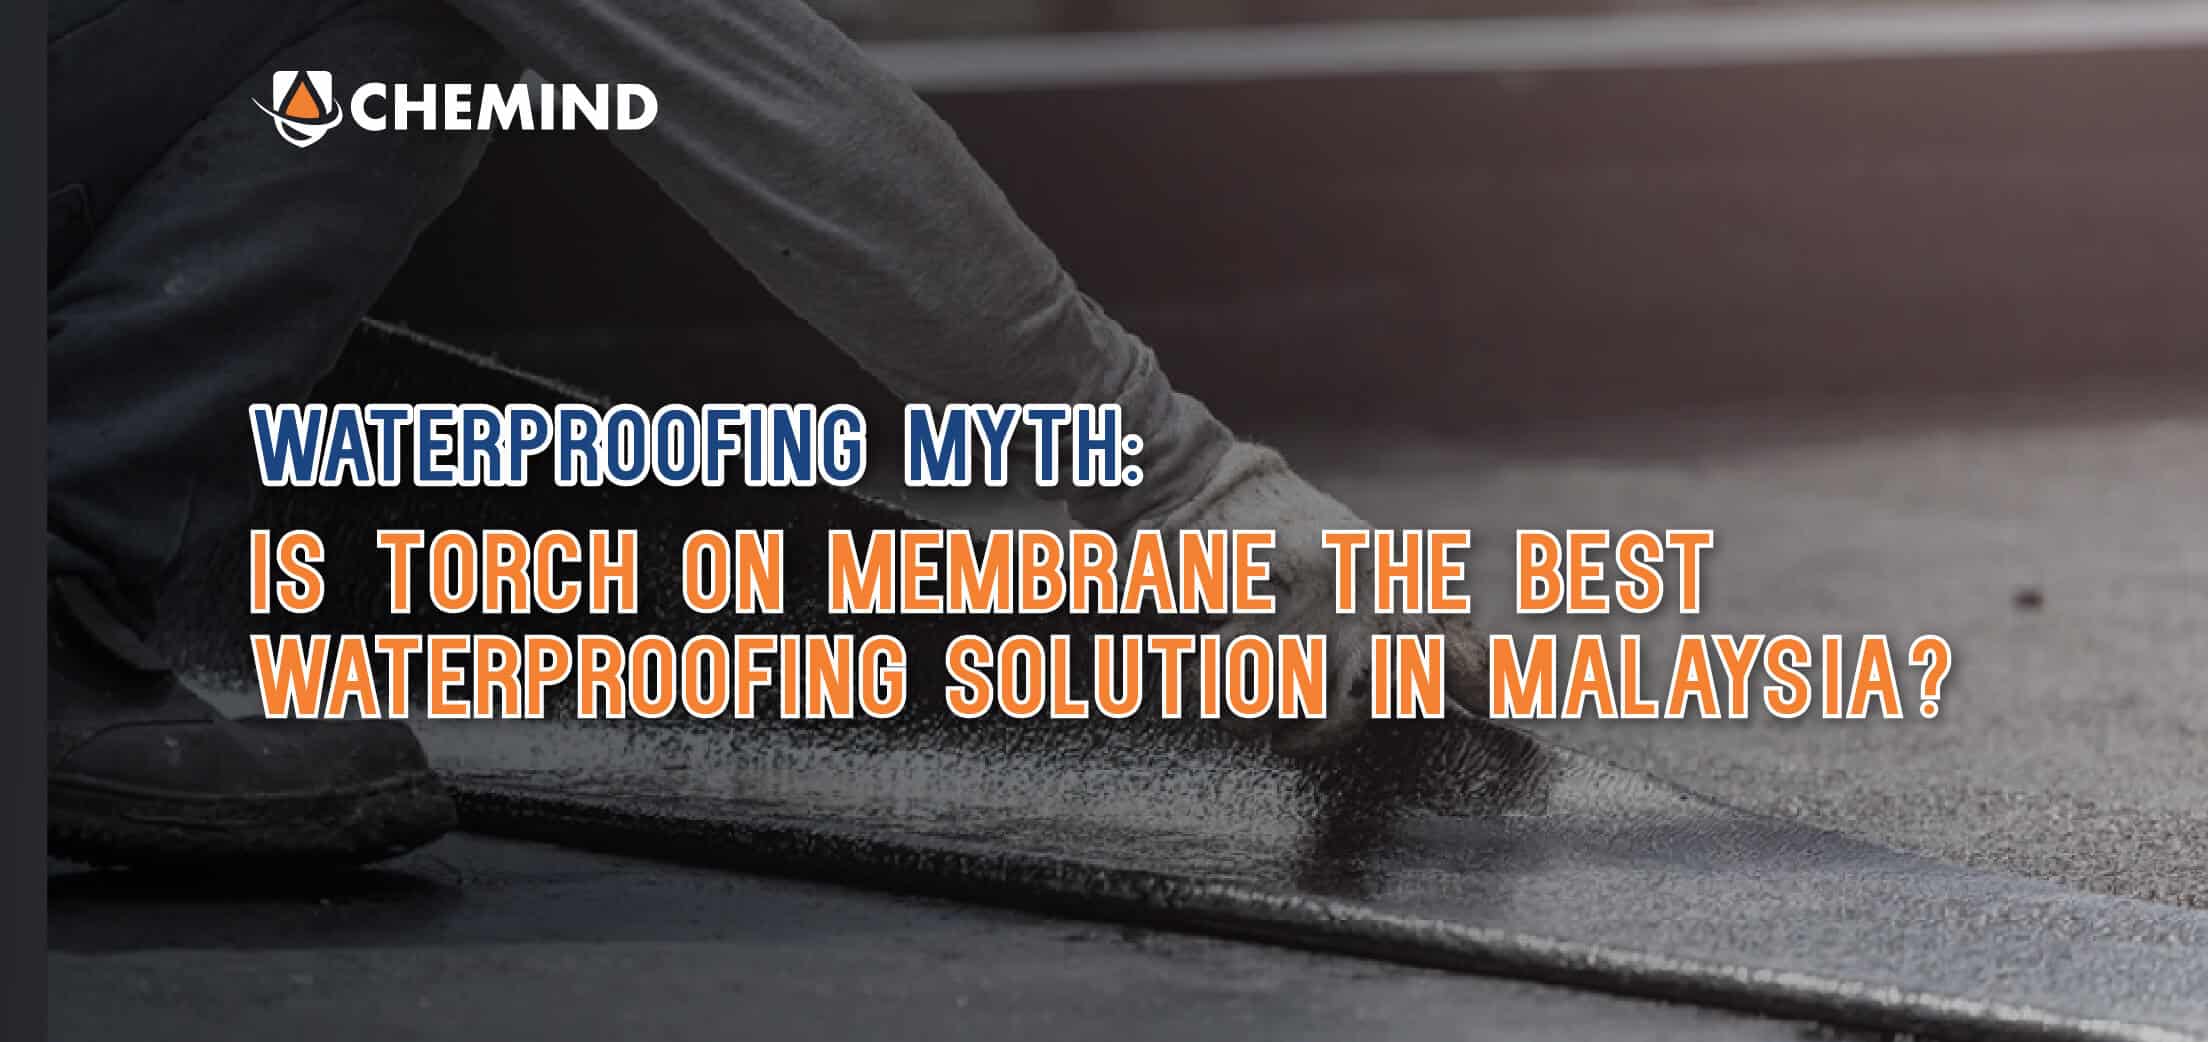 Chemind Blog Waterproofing myth: Is Torch-on Membrane The Best Waterproofing Solution in Malaysia?